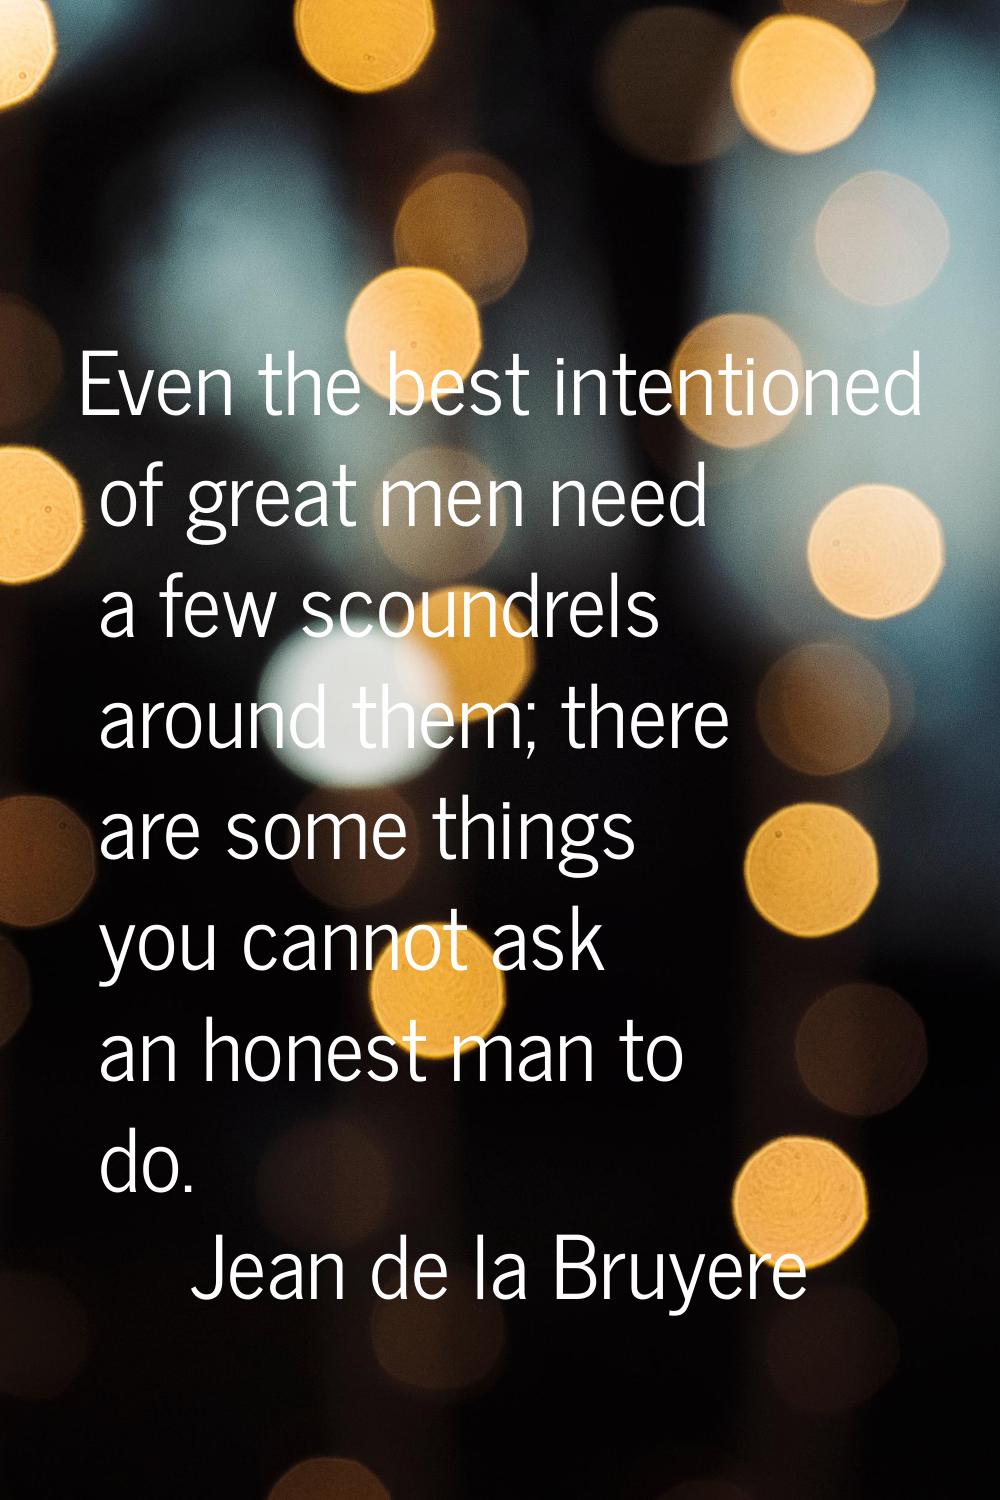 Even the best intentioned of great men need a few scoundrels around them; there are some things you